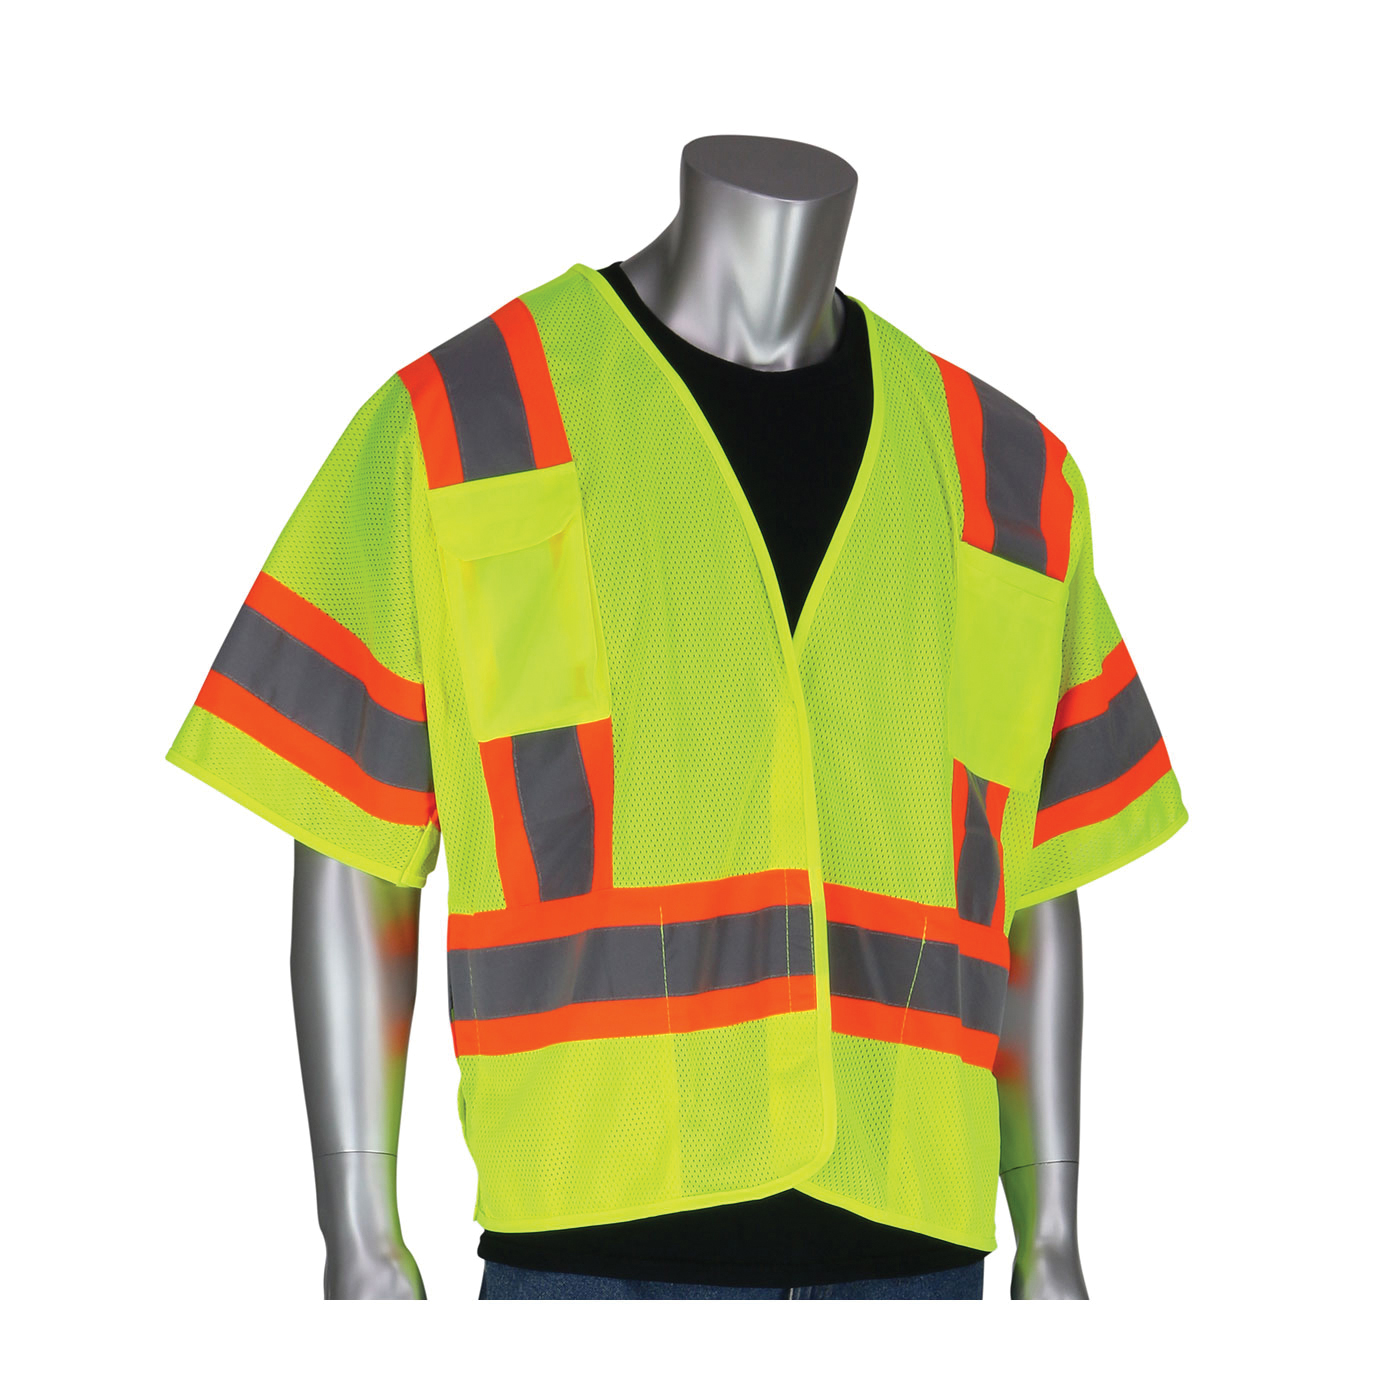 PIP® 303-5PMTT-LY/5X 2-Tone Safety Vest, 5XL, Hi-Viz Lime Yellow, Polyester Mesh, Hook and Loop Closure, 4 Pockets, ANSI Class: Class 3, Specifications Met: ANSI 107 Type R